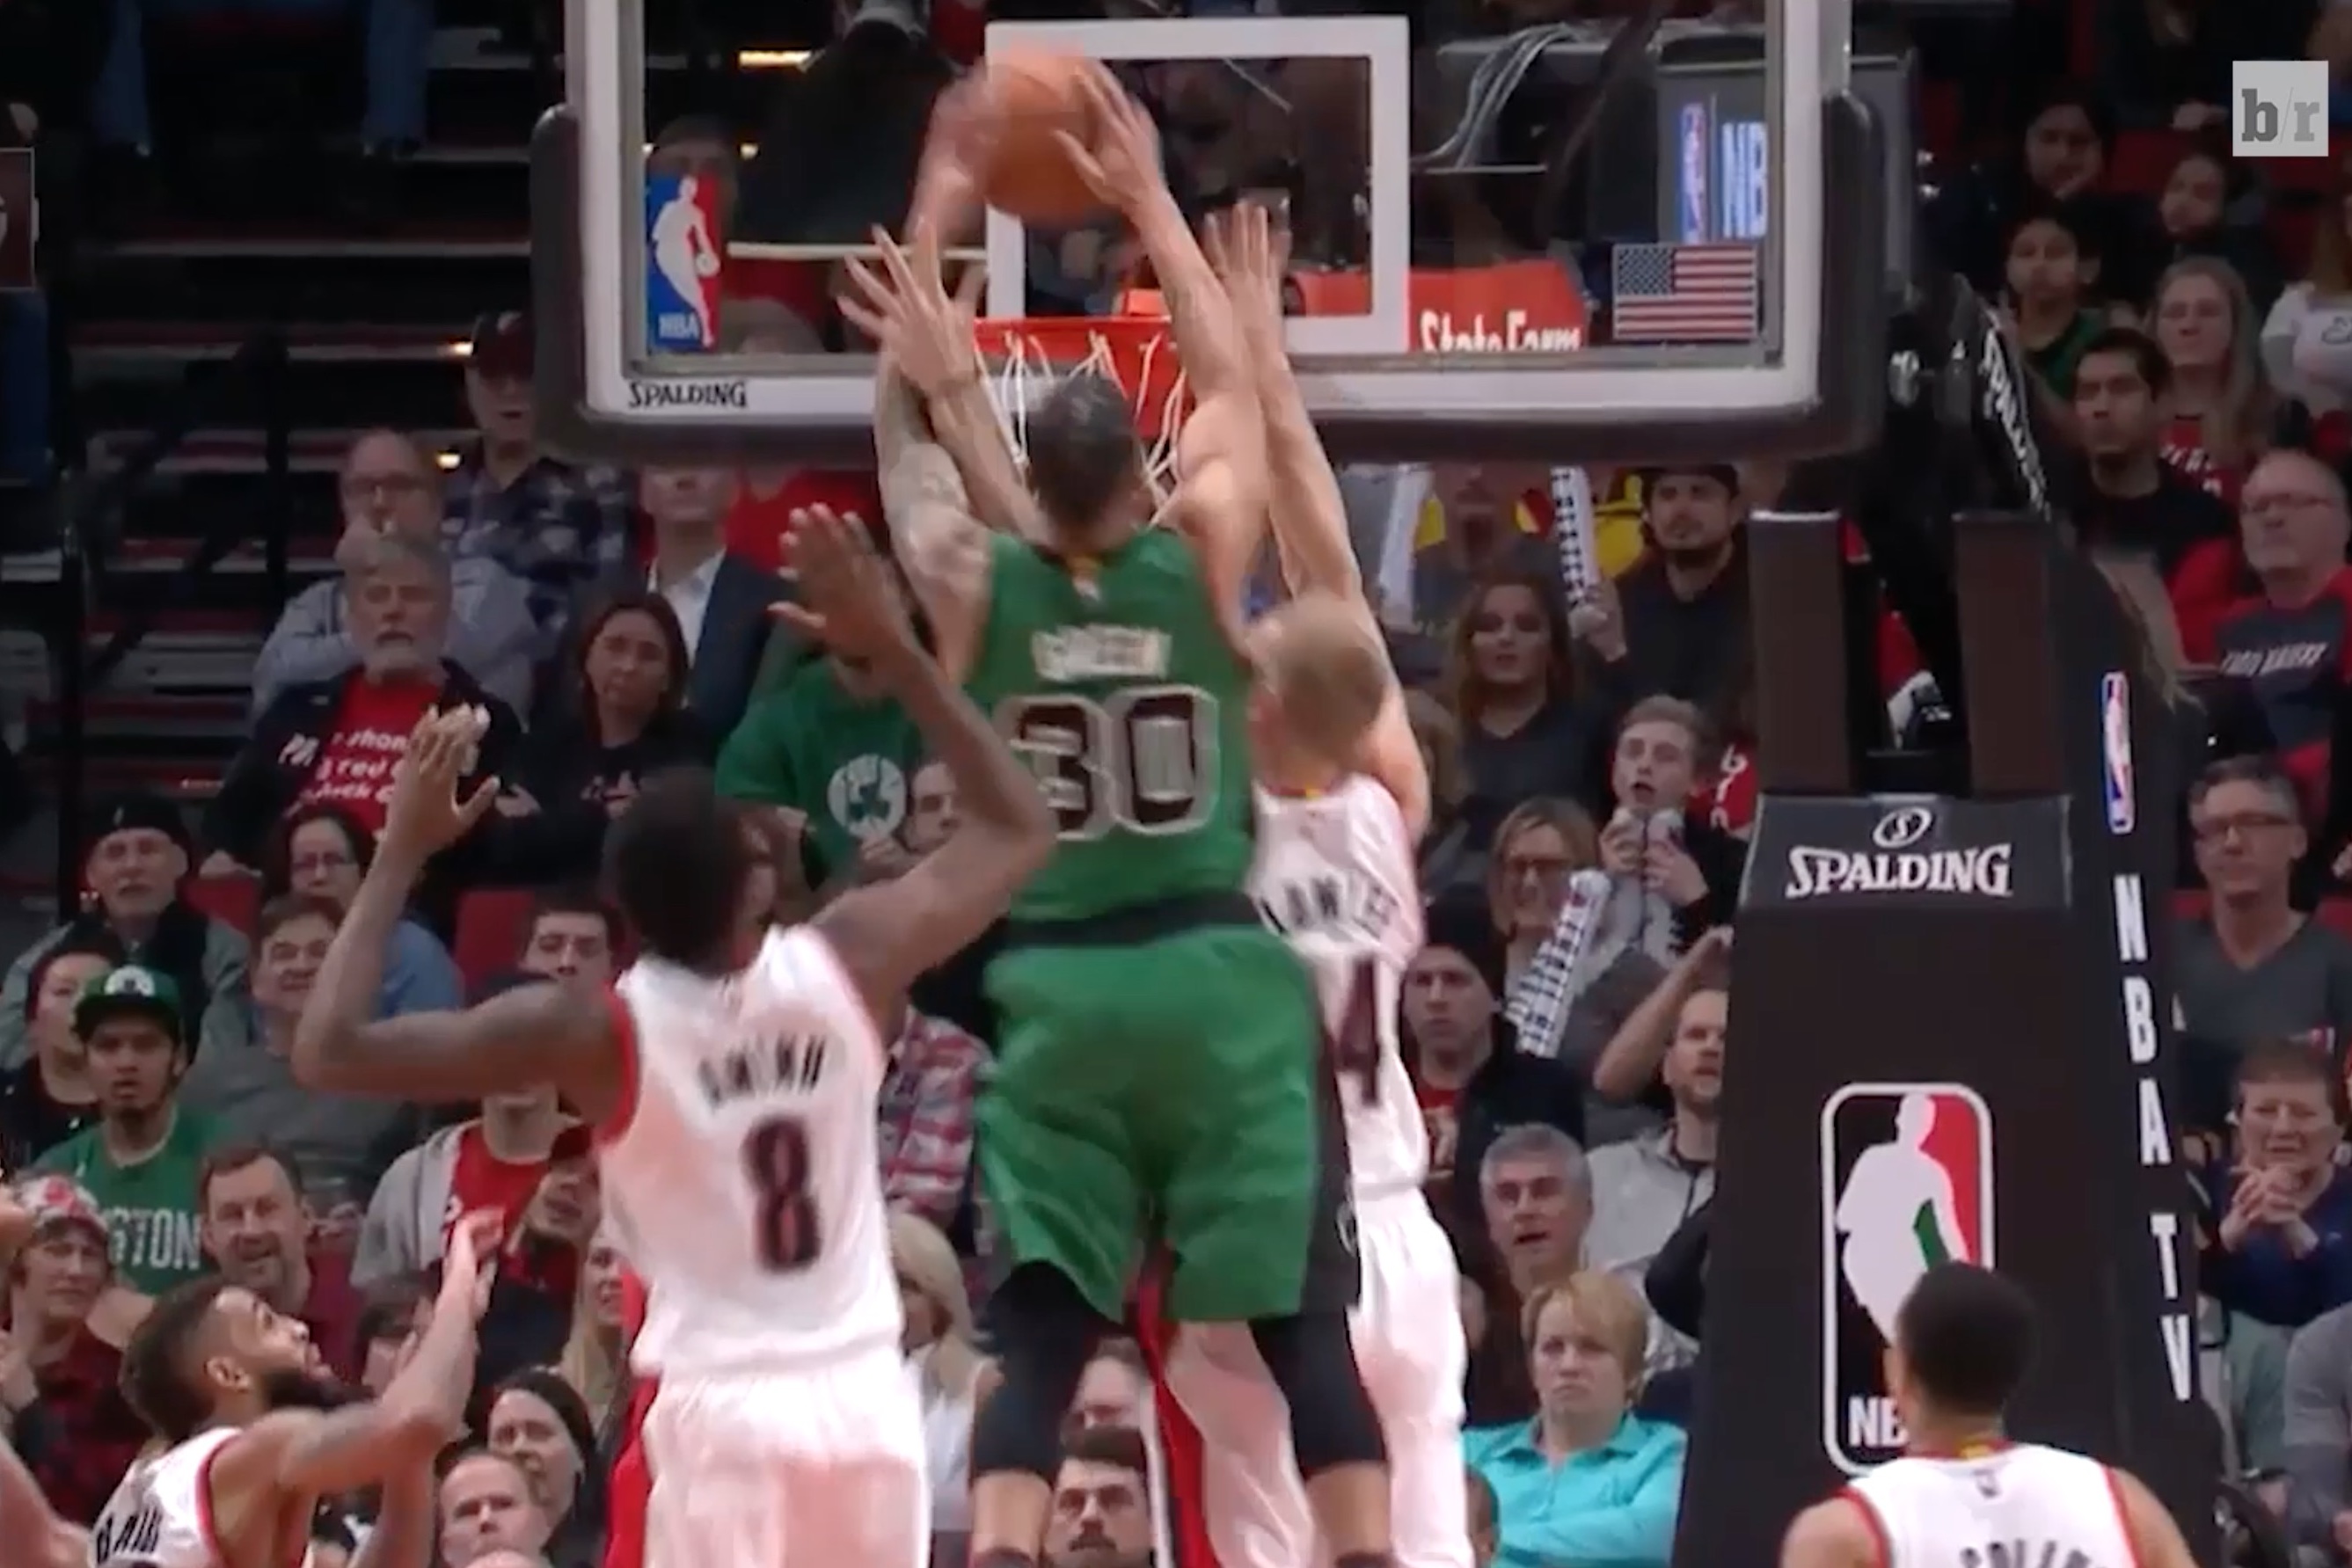 Gerald Green throws down a double-pump slam in the face of Mason